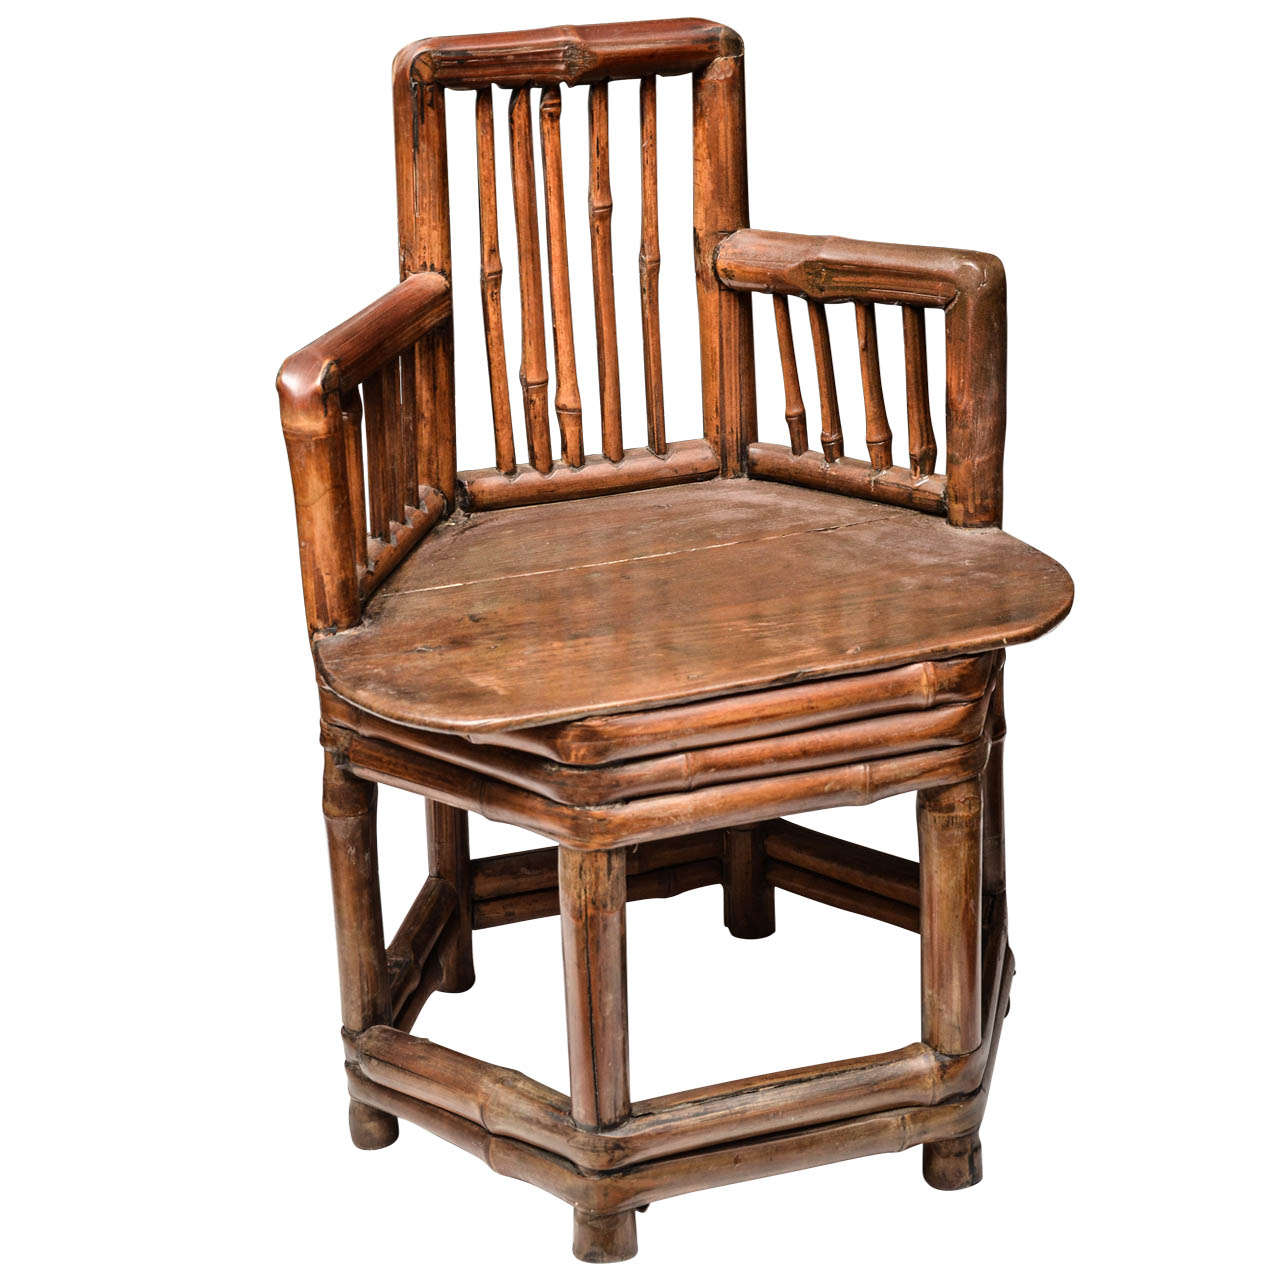 Mid-Late 19th Century Q'ing Dynasty Ningbo Bamboo Child's Chair with Elm Seat For Sale